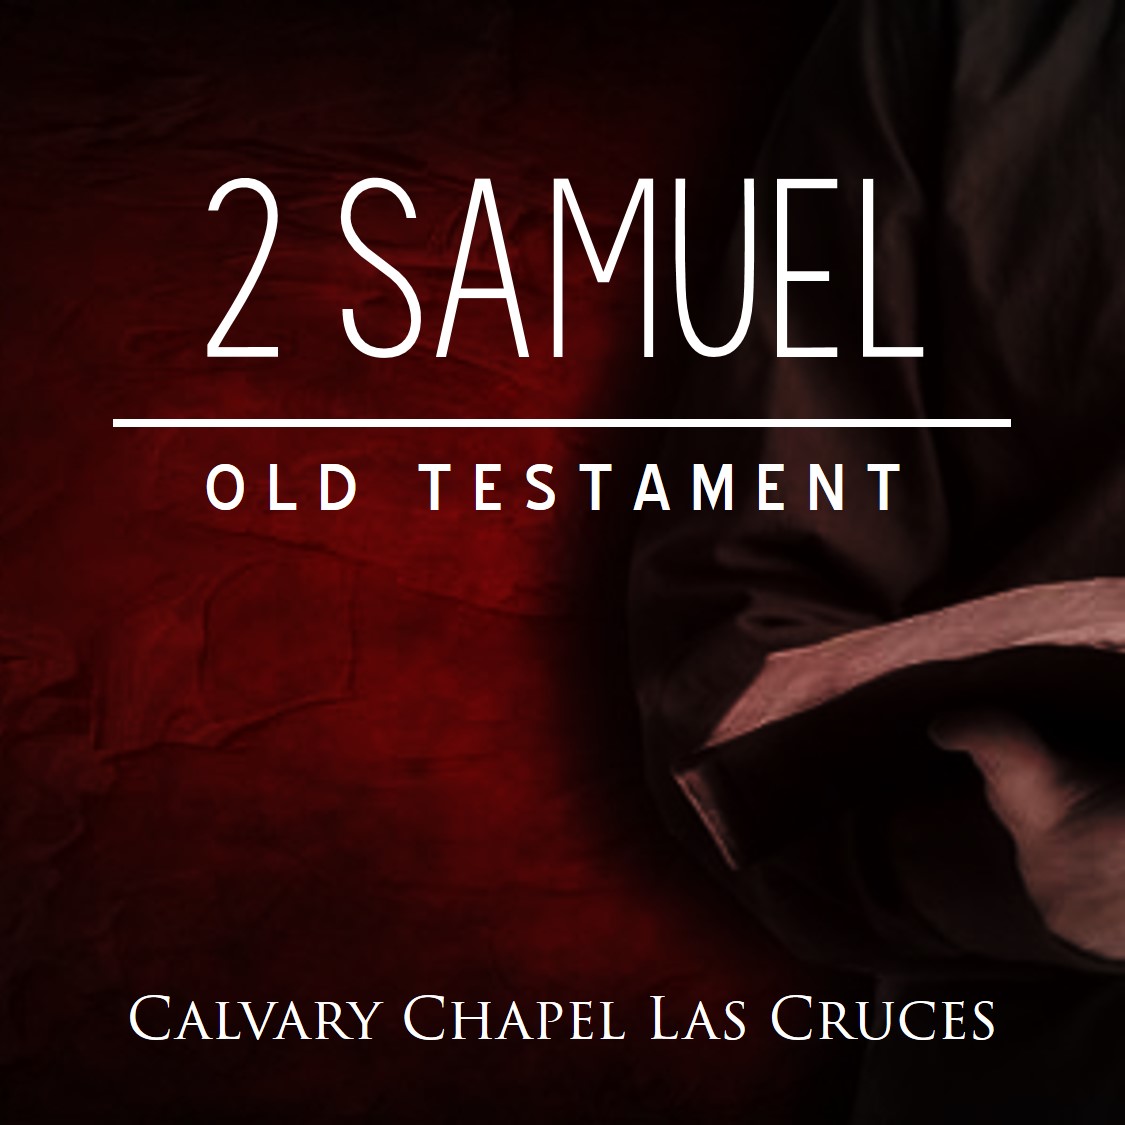 2 Samuel Chapters 5 - ”David’s Reign in Israel and His Faith”